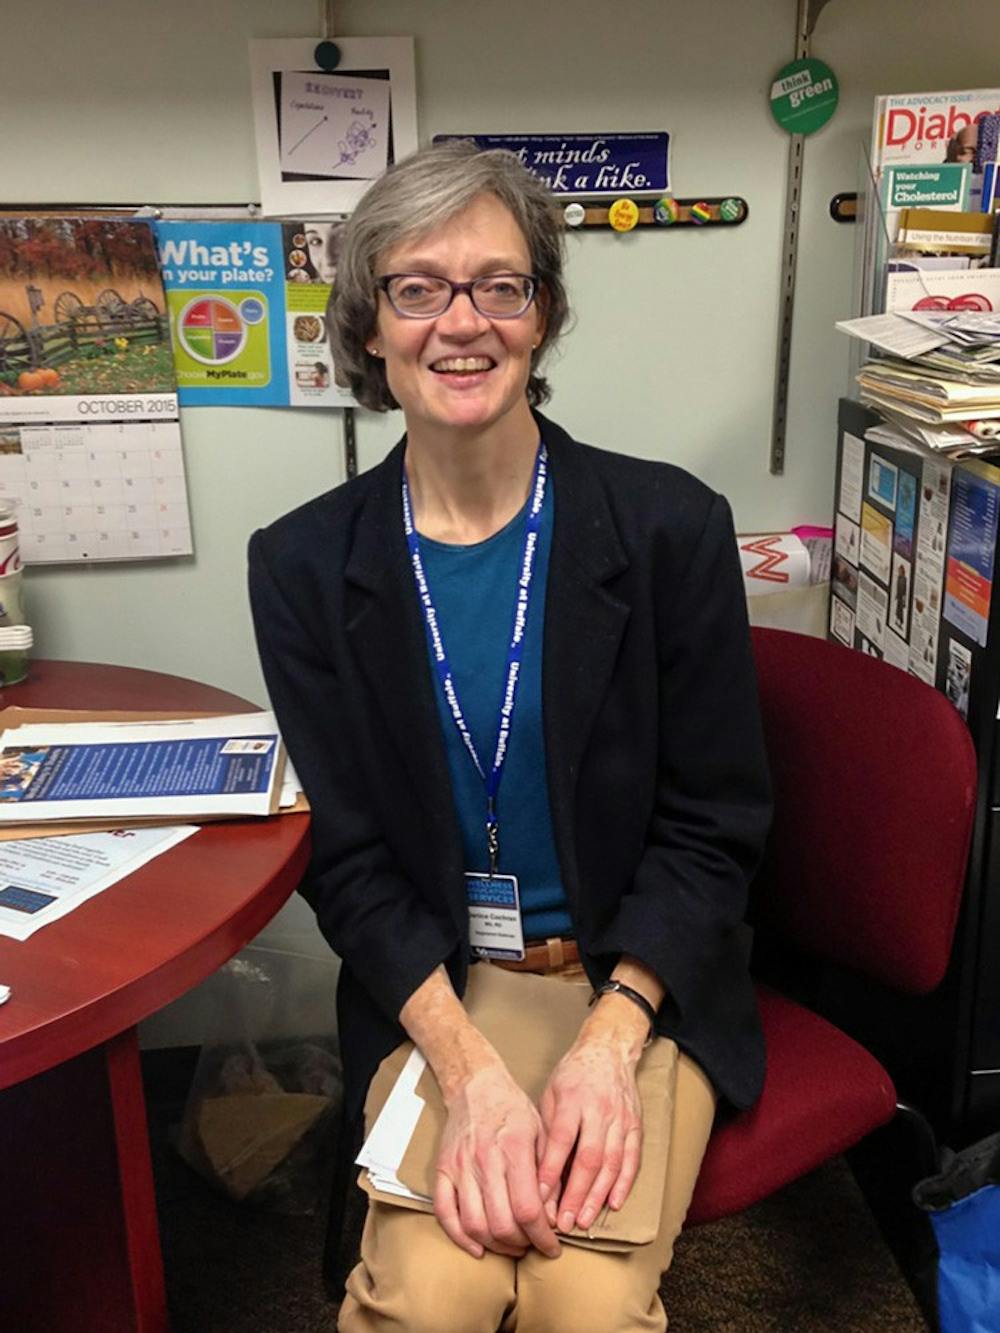 <p>Janice Cochran, dietitian and coordinator of nutrition and physical activity at Wellness Education Services, stresses the importance of modeling a healthy lifestyle through food and stress release.</p>